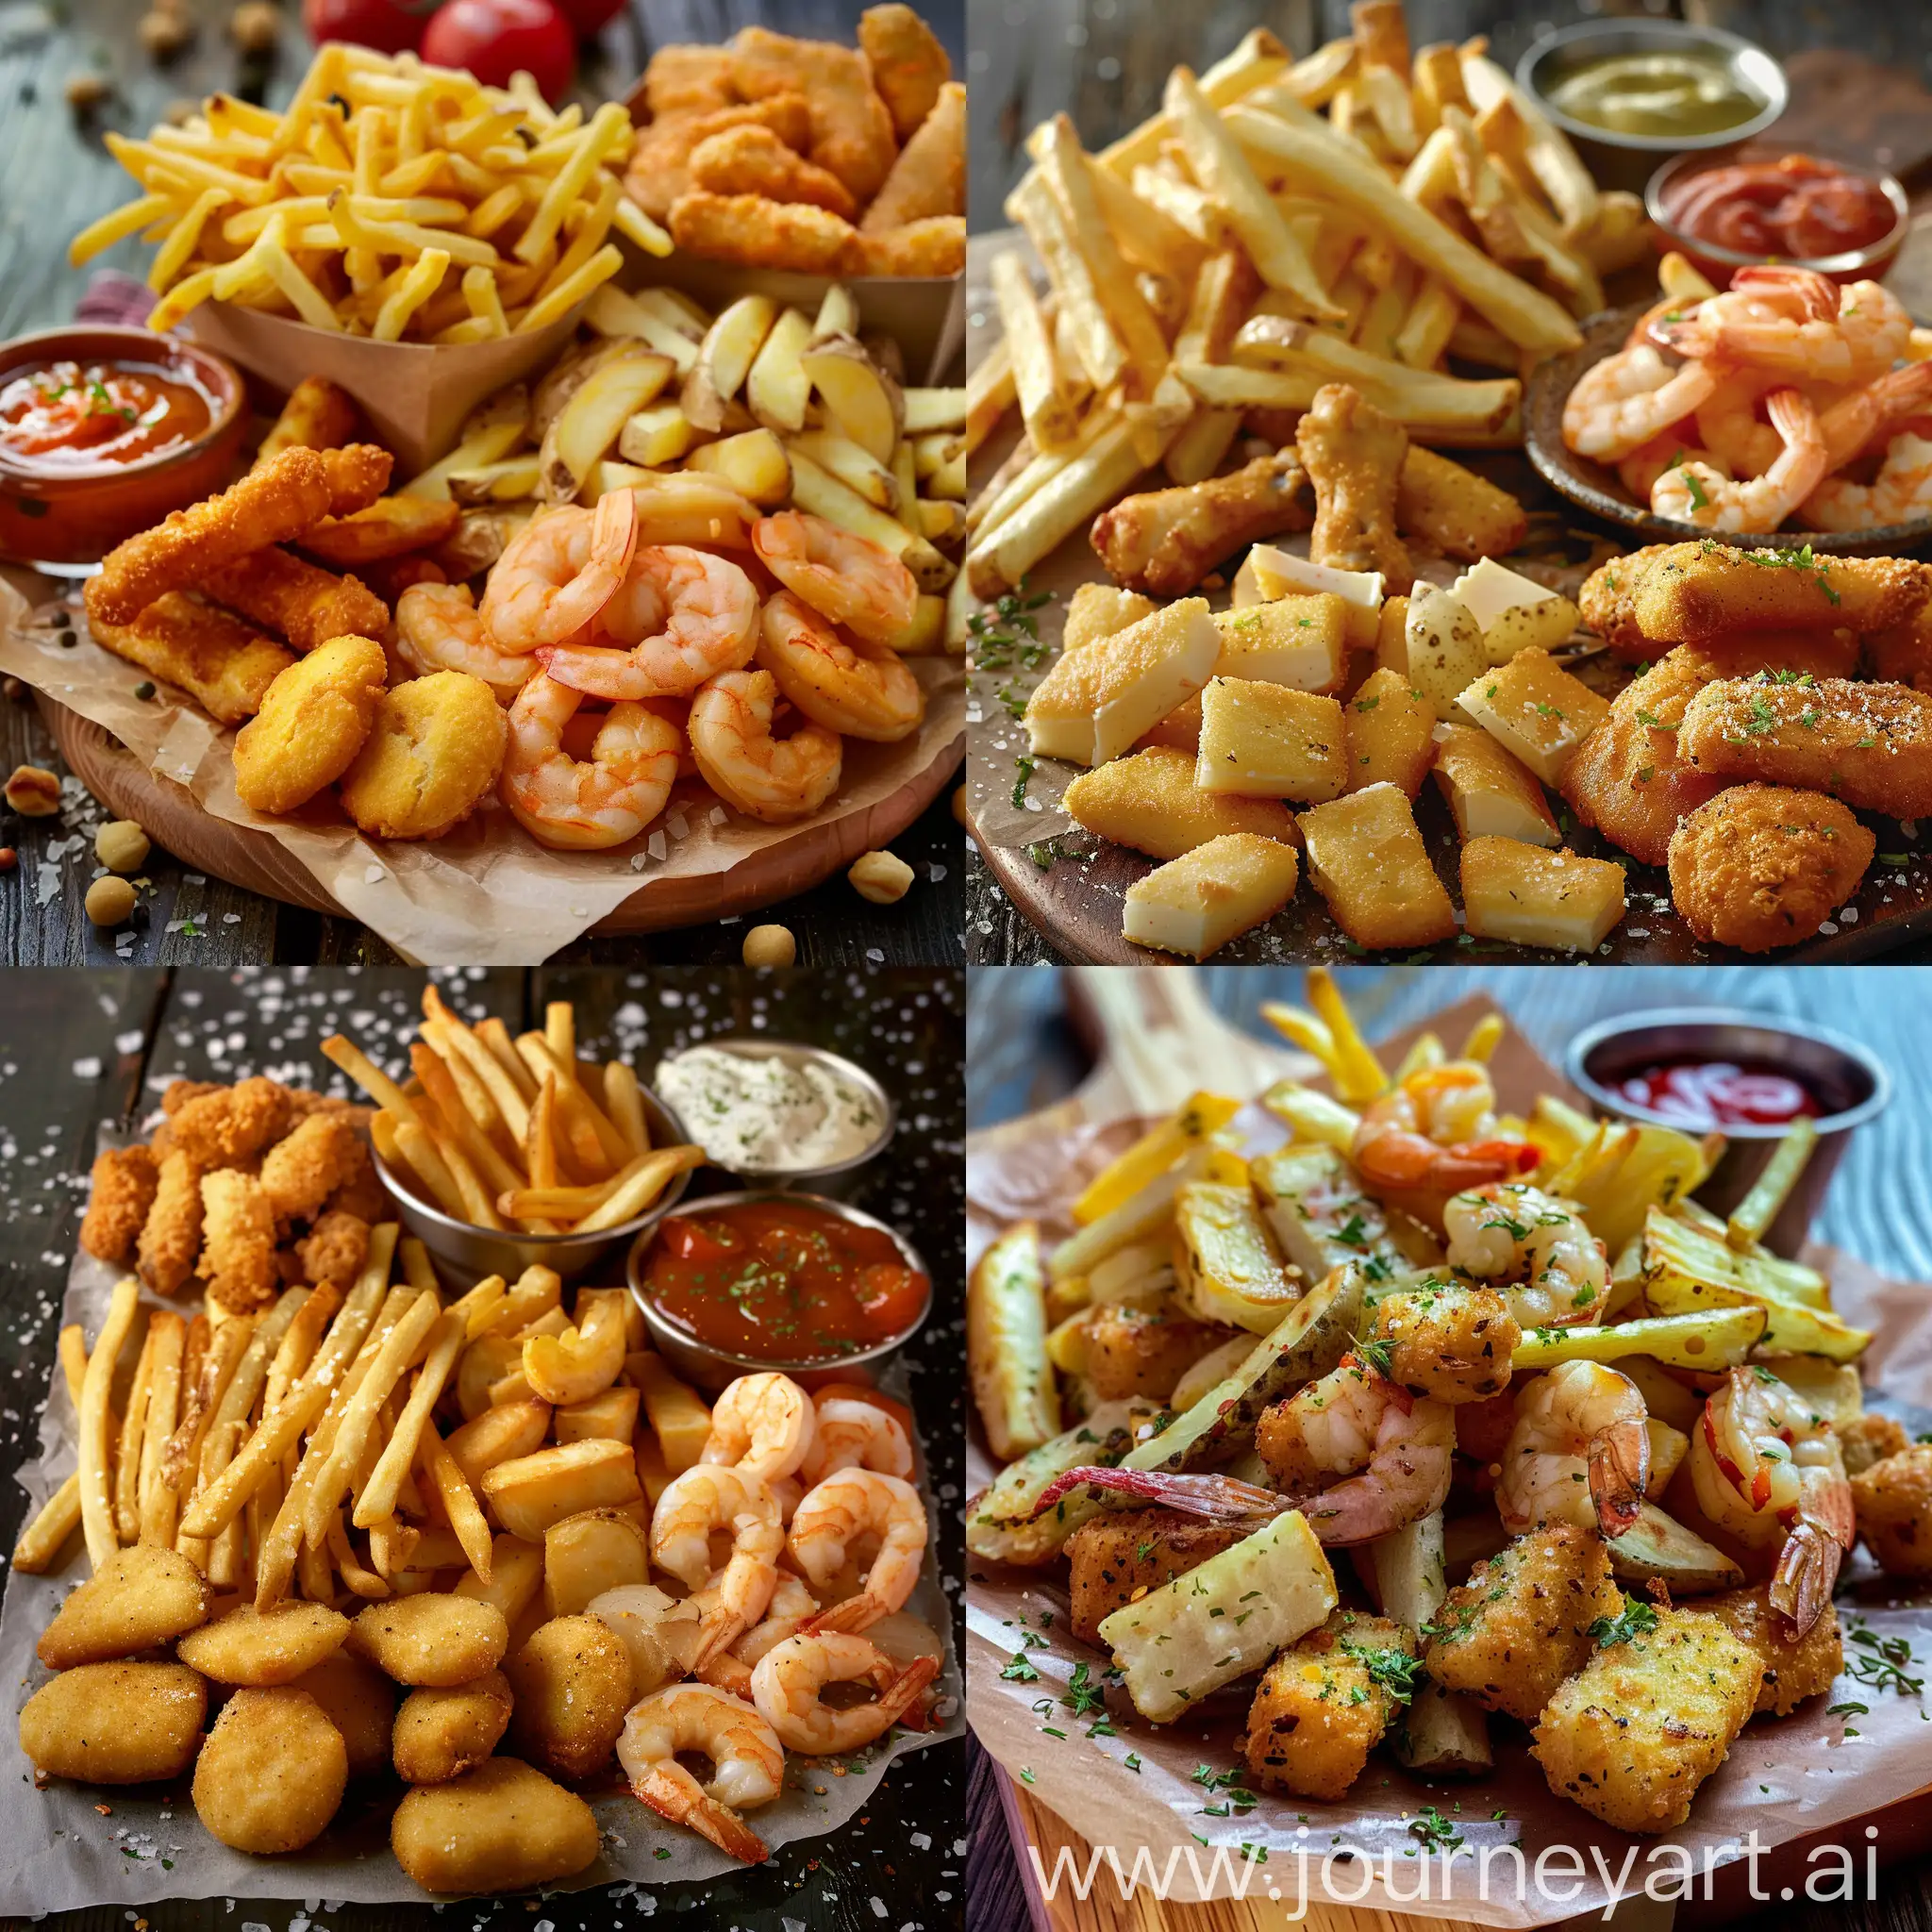 Gourmet-Snack-Platter-with-French-Fries-Nuggets-Shrimp-Wings-and-Cheese-Sticks